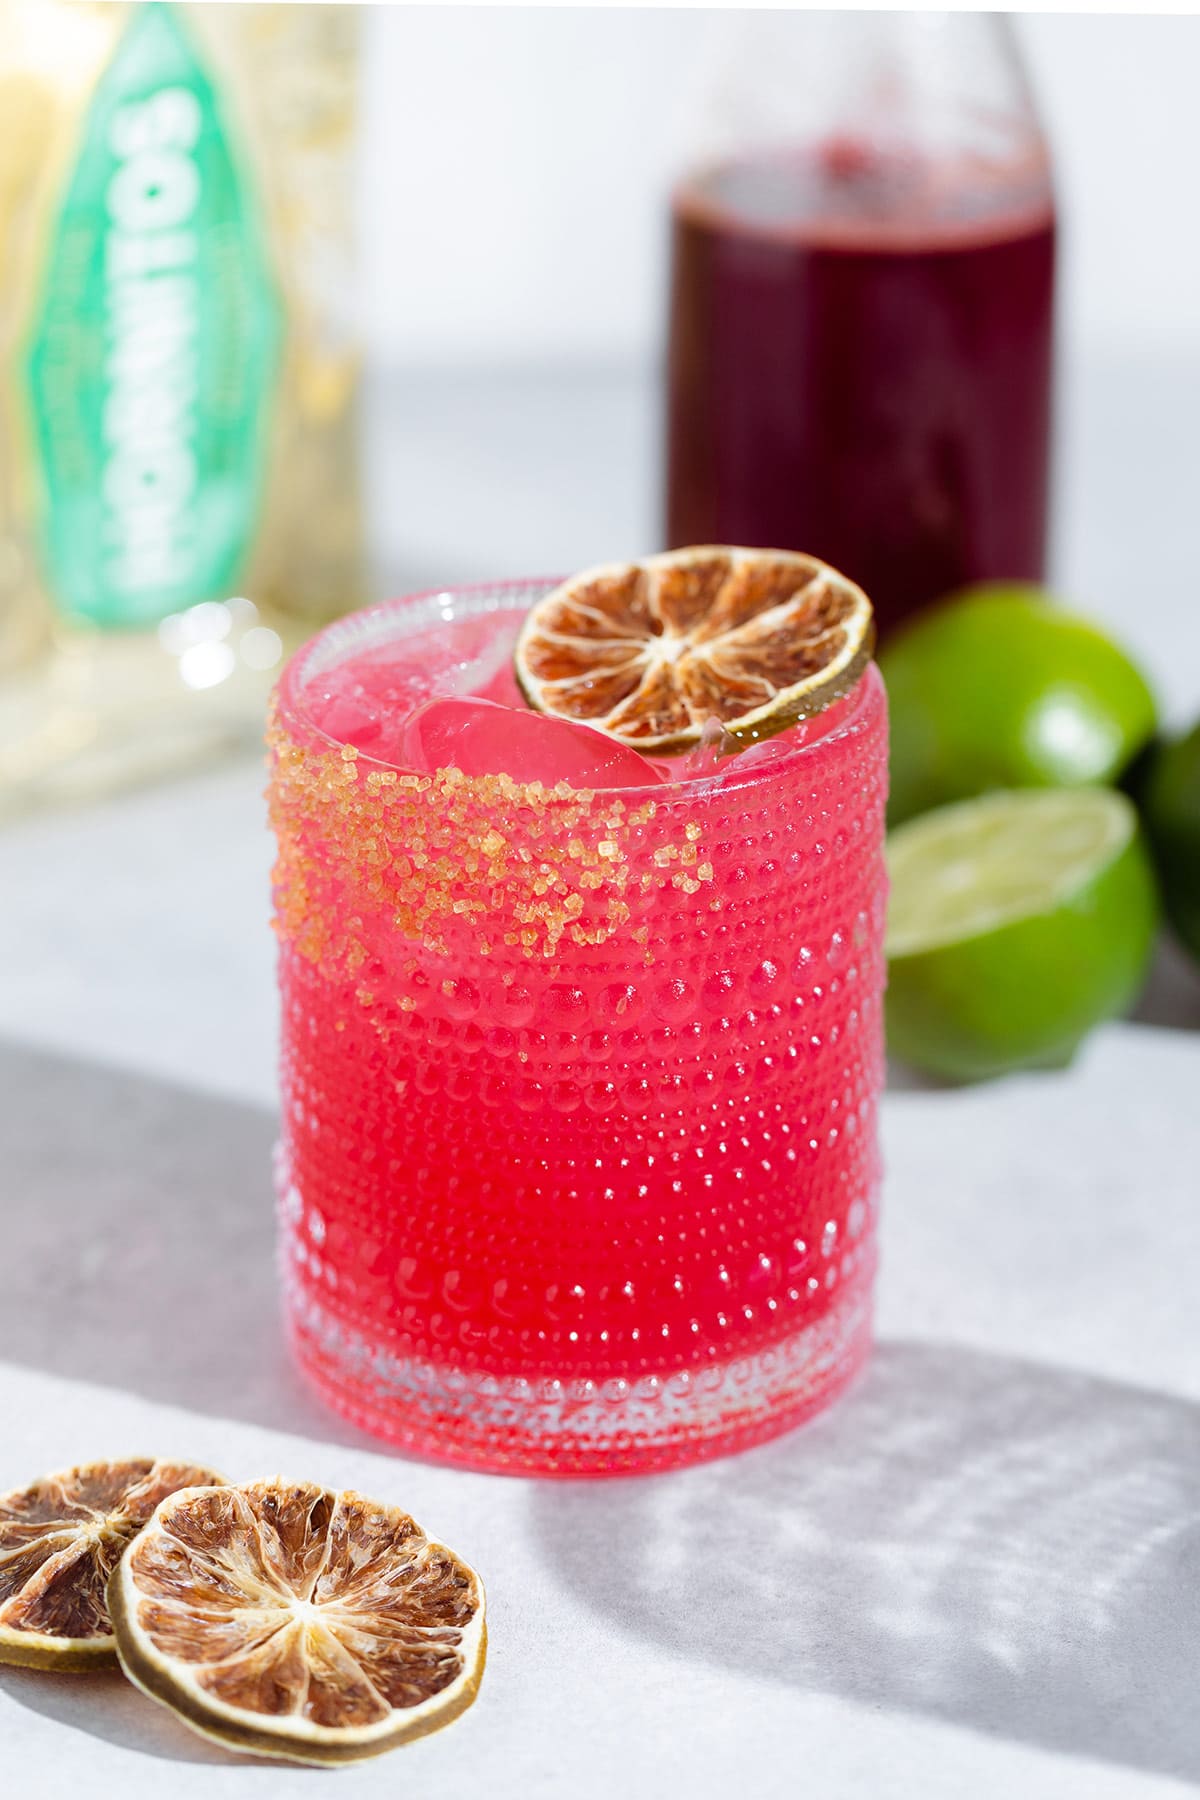 Bright pink margarita in a short glass garnished with a dehydrated lime slice on a white background.